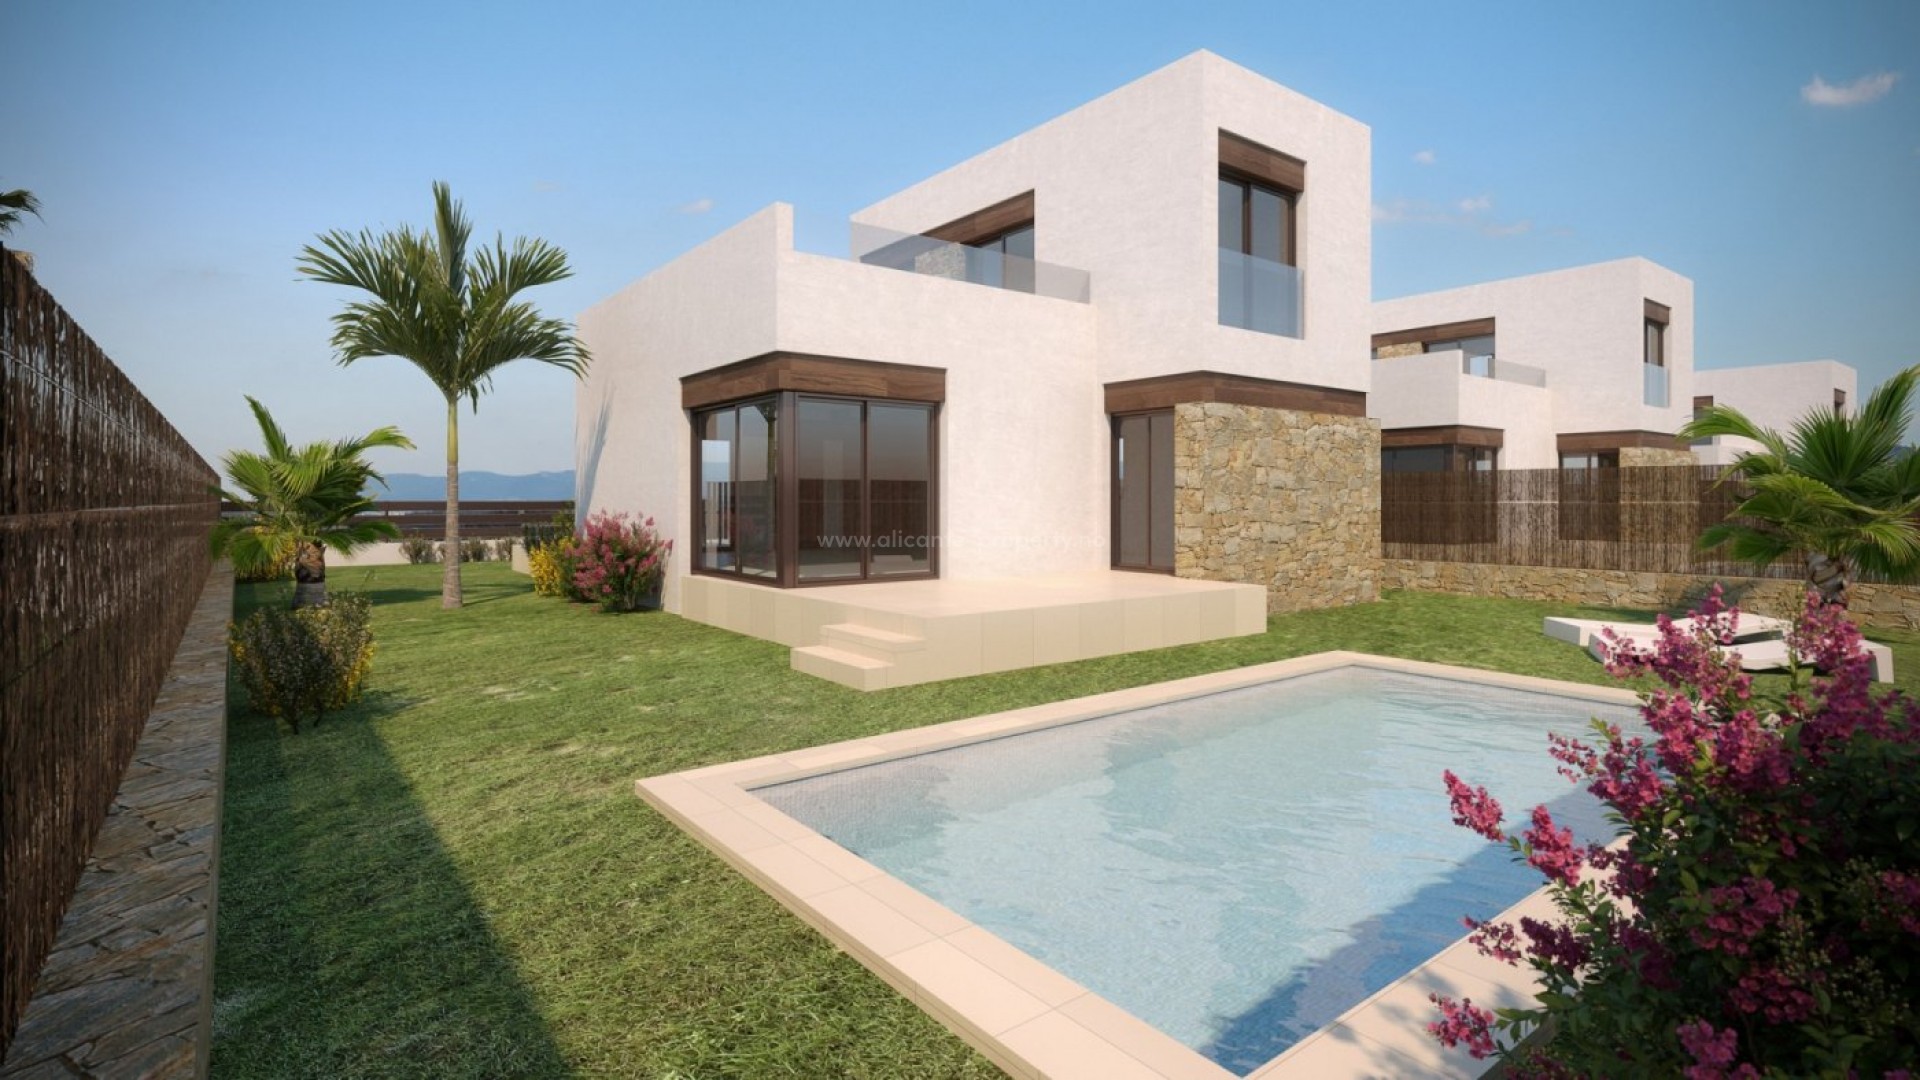 Brand new houses/villas in Balcon de Finestrat, 3 bedrooms, 2 bathrooms, 1 or 2 floors, large gardens with pool, parking on site